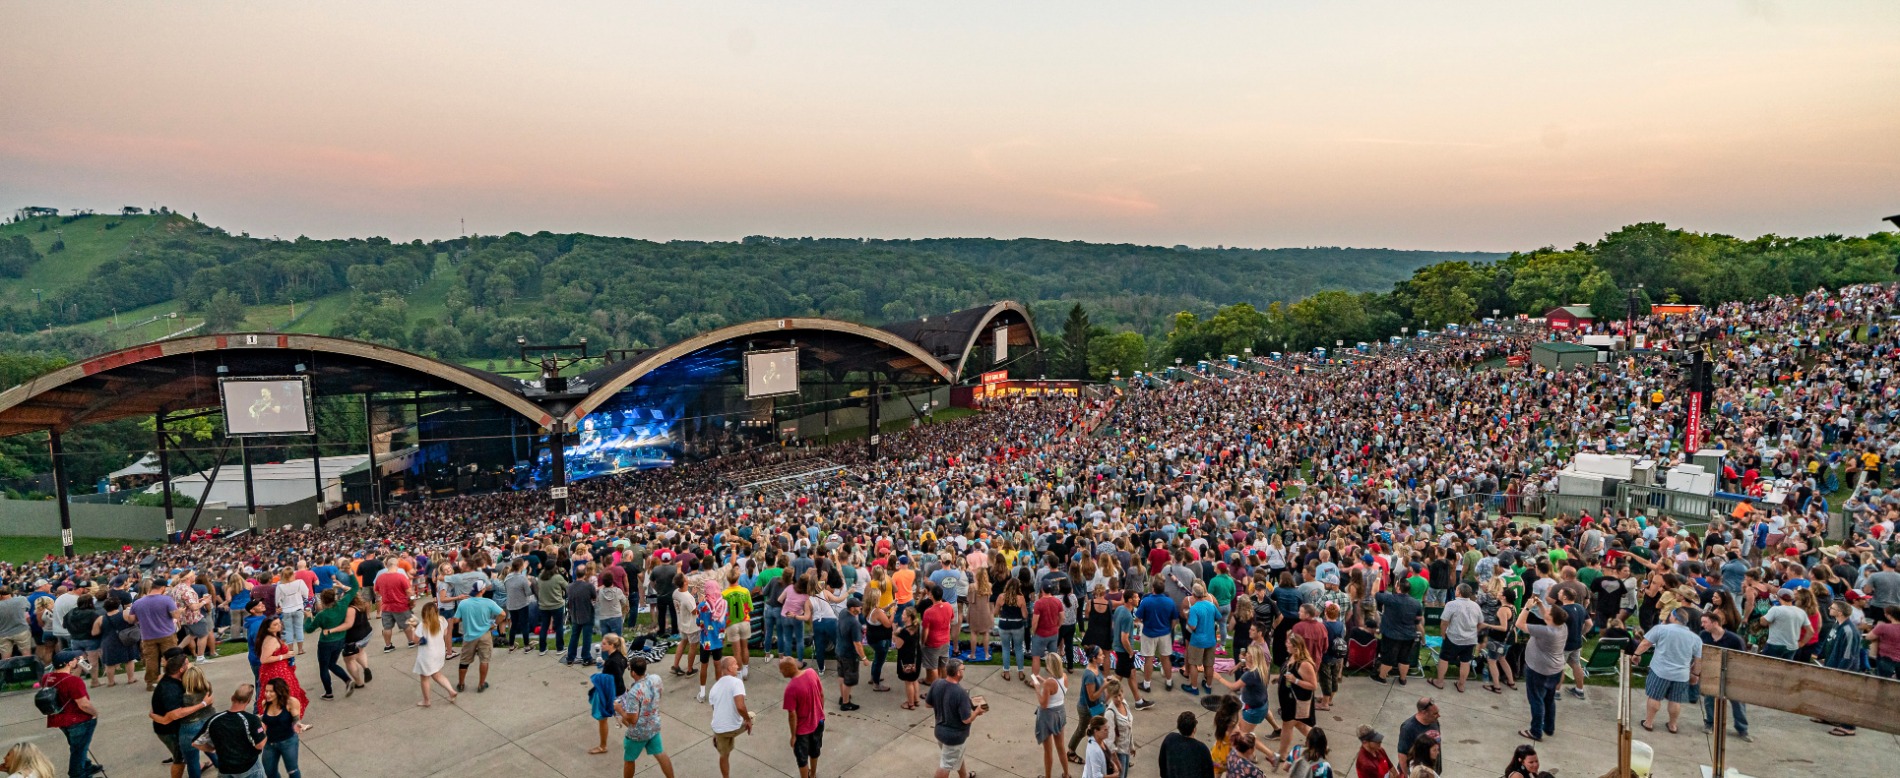 Alpine Valley Music Theatre Wisconsin Event Venues Live Nation